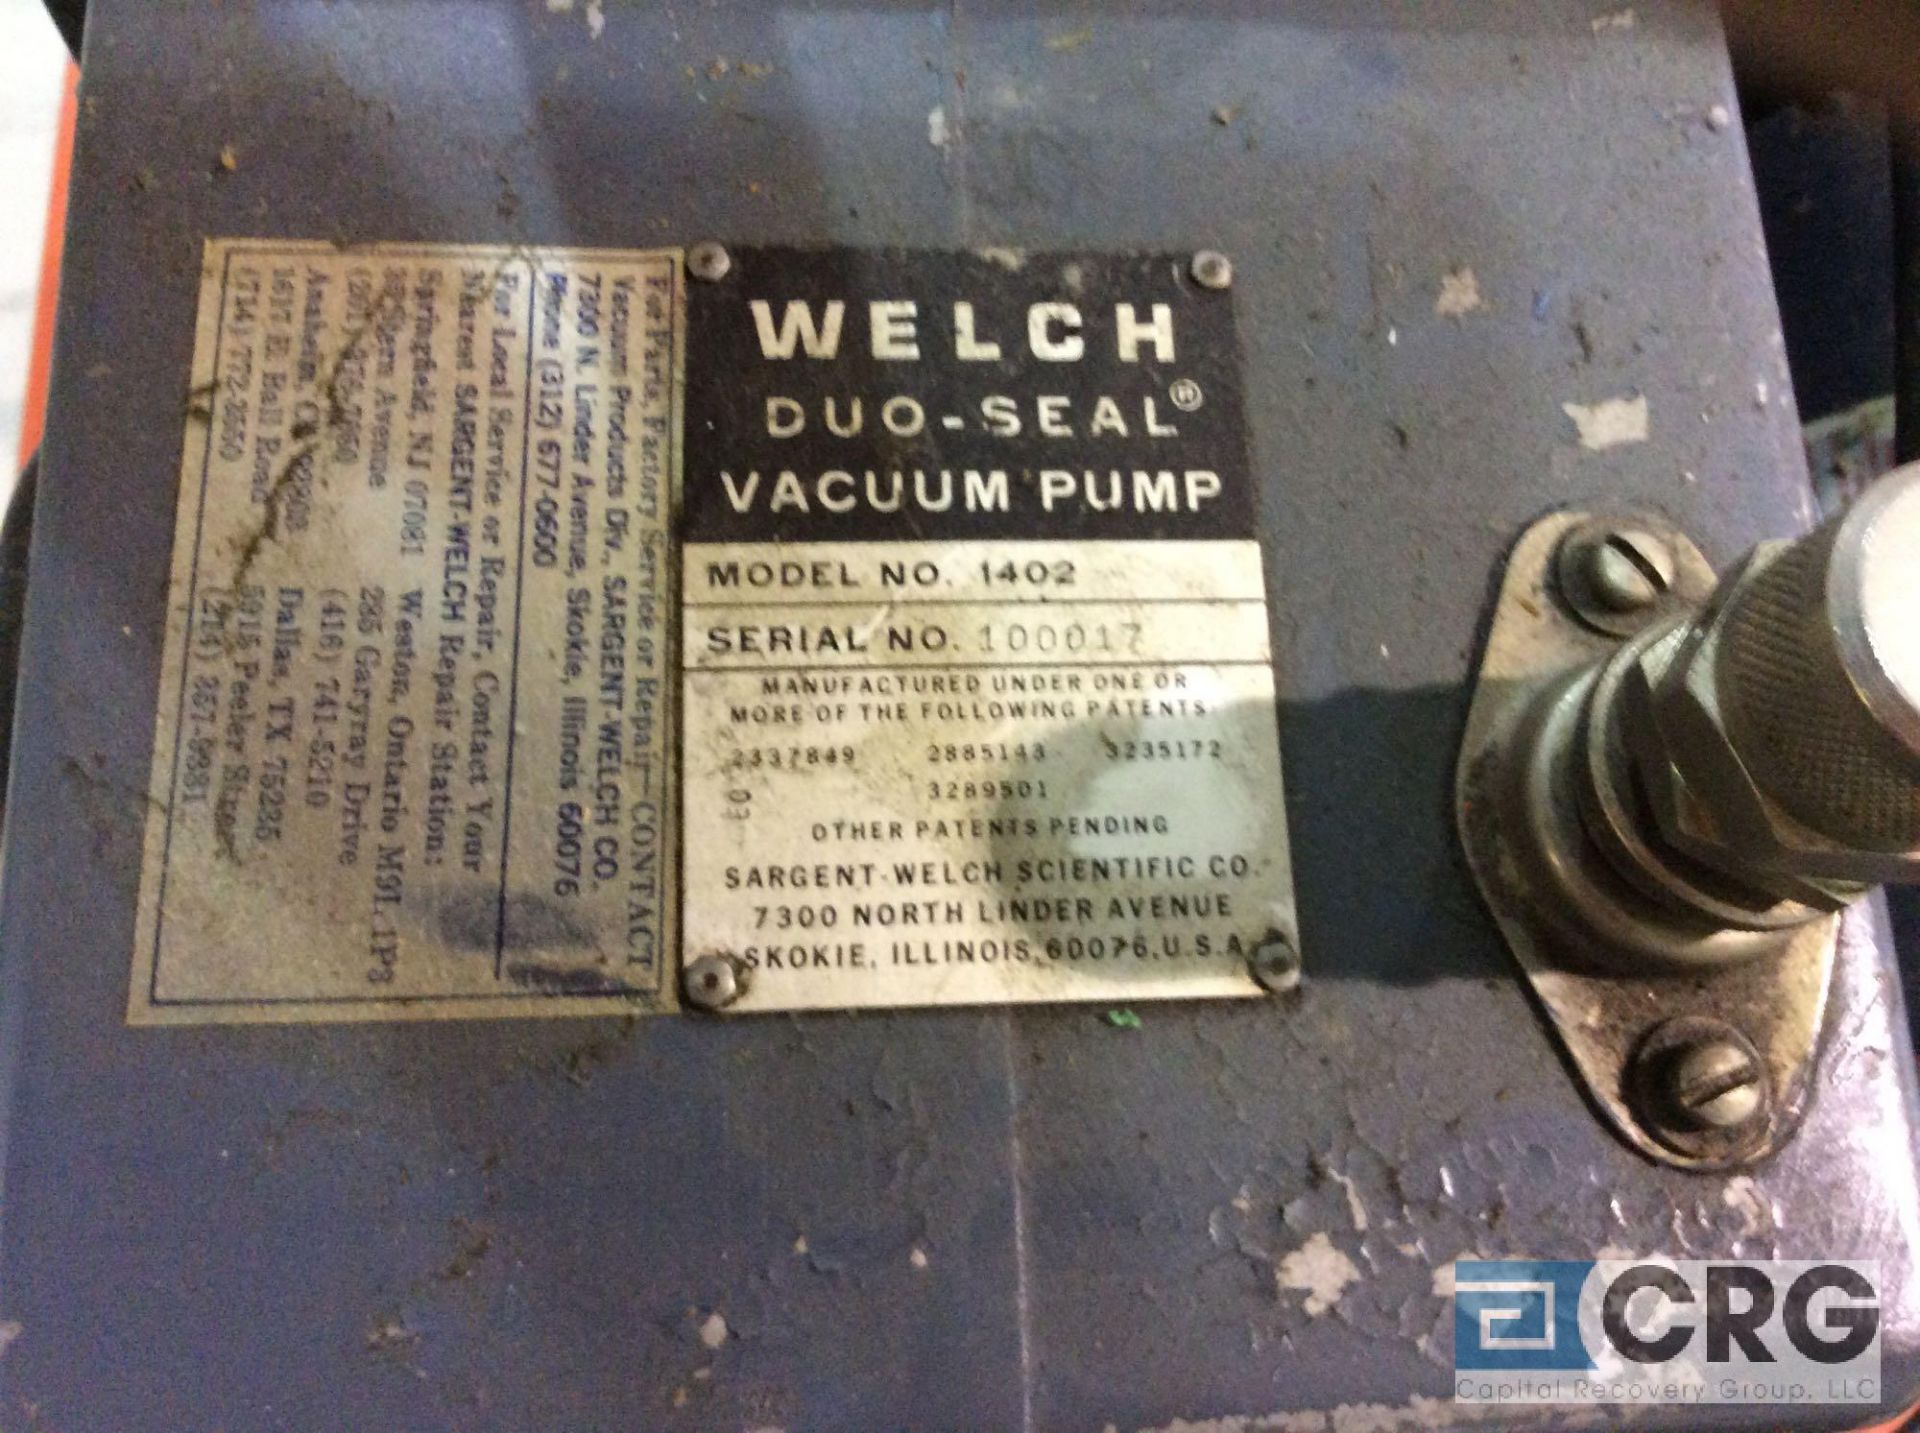 Lot of two assorted vacuum pumps, one Welch Duo-Seal Vacuum Pump, model 1402, serial 100017, and one - Image 3 of 6